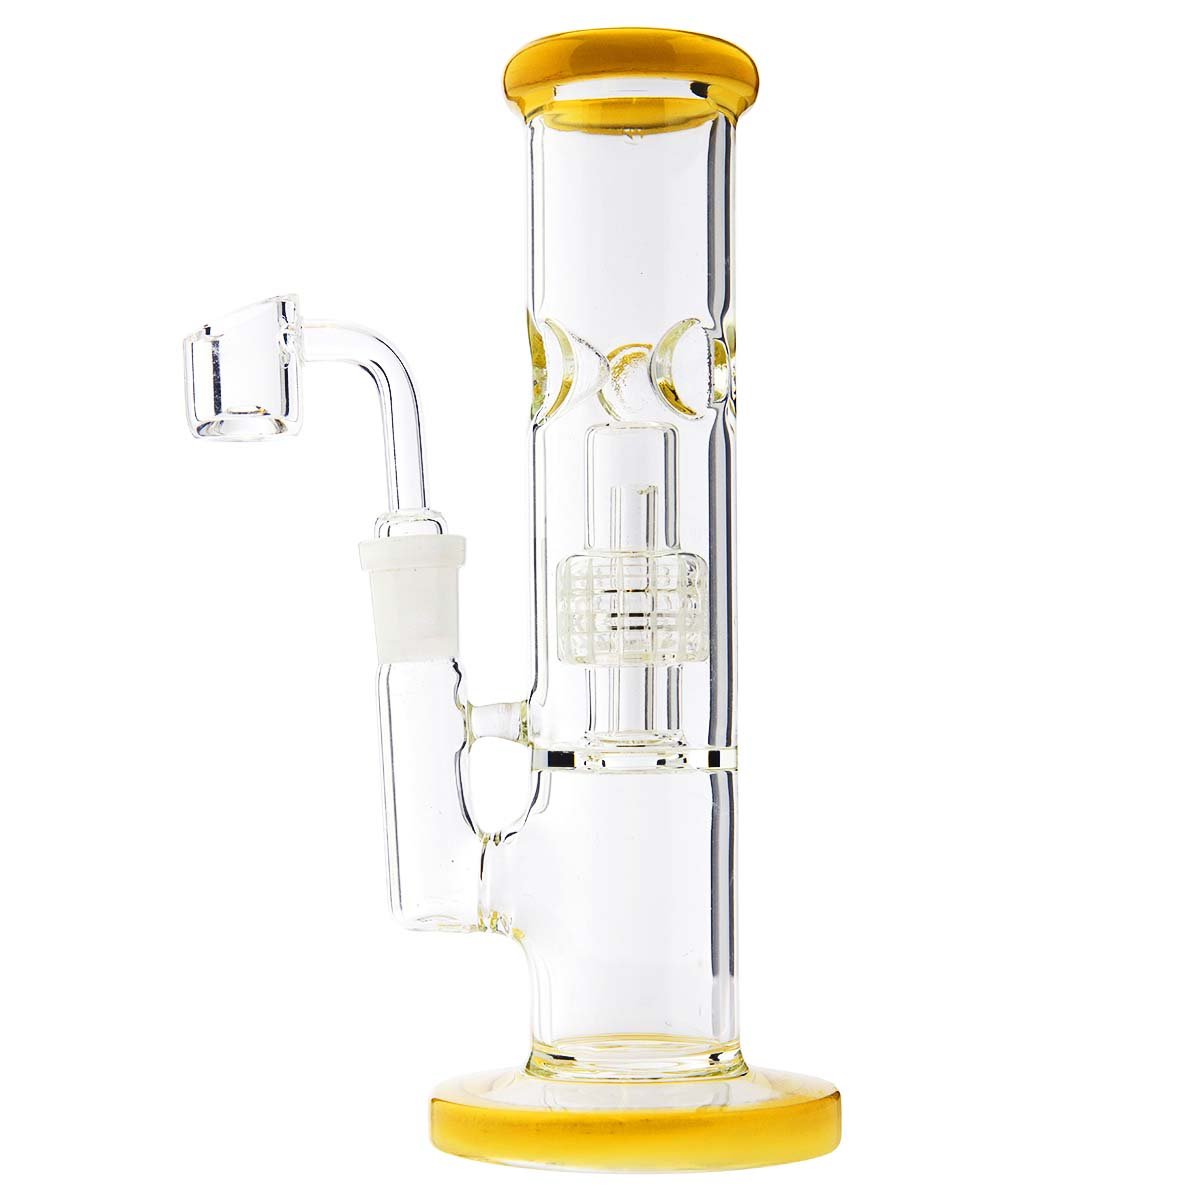 Waterpipe G/g Conical Showerhead 8 14Mm Female With Bowl And Banger Yellow